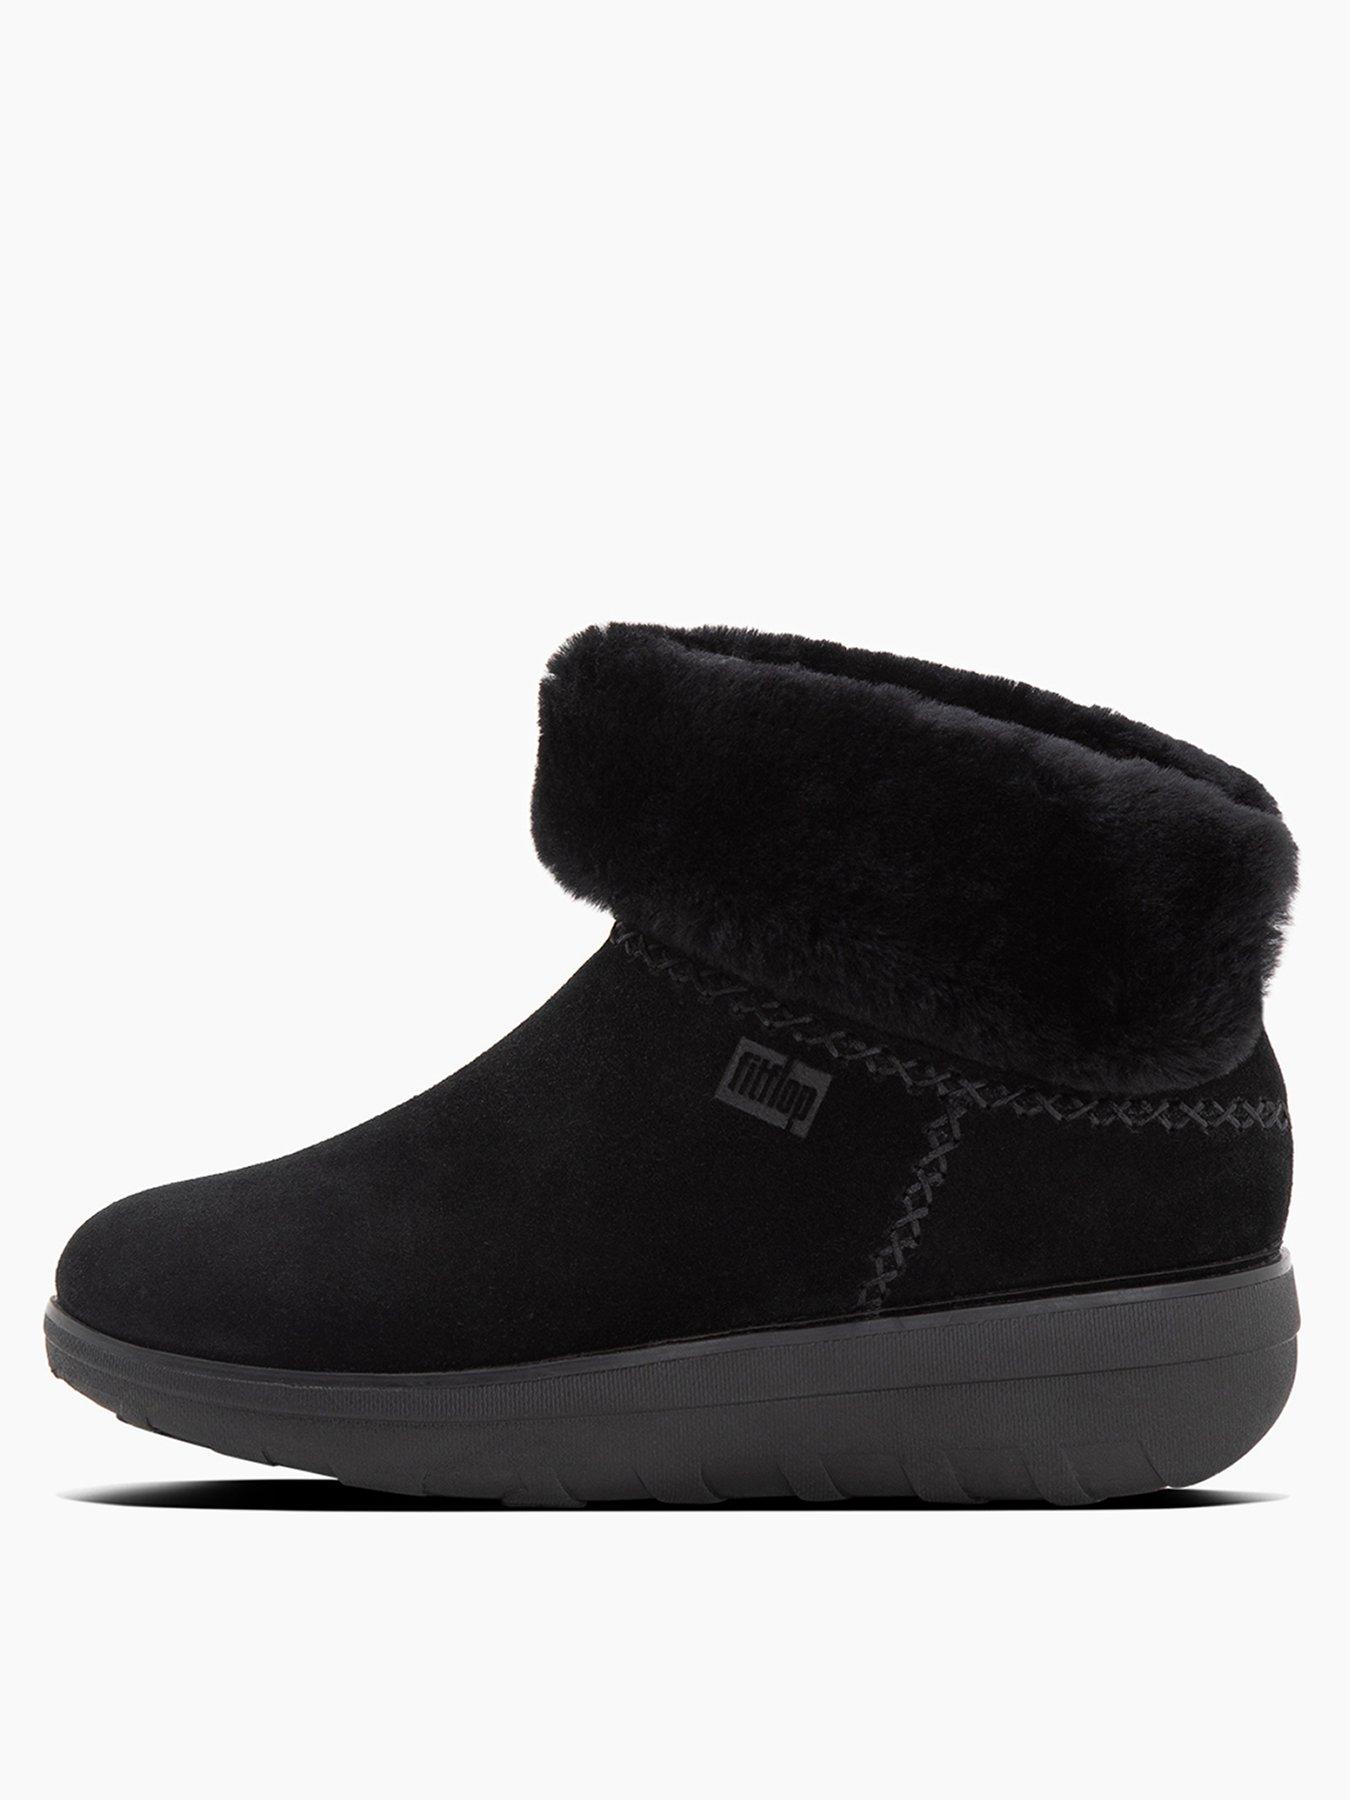 fitflop ladies boots